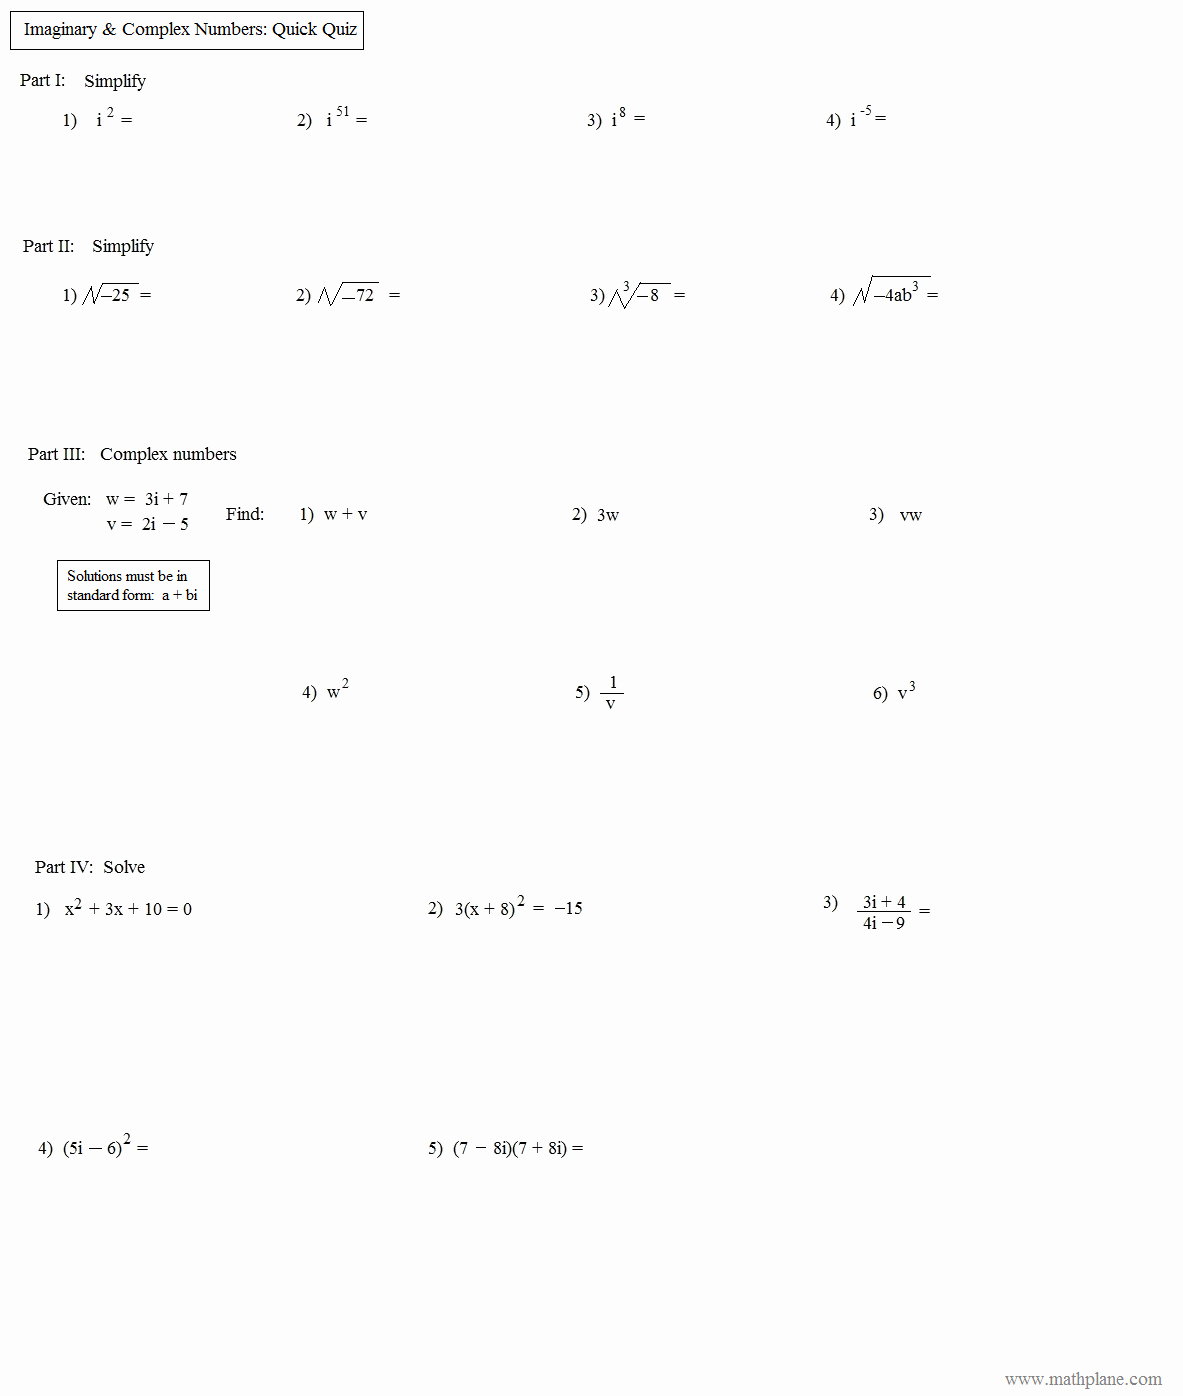 Complex Numbers Worksheet Answers Unique Math Plane Imaginary and Plex Numbers